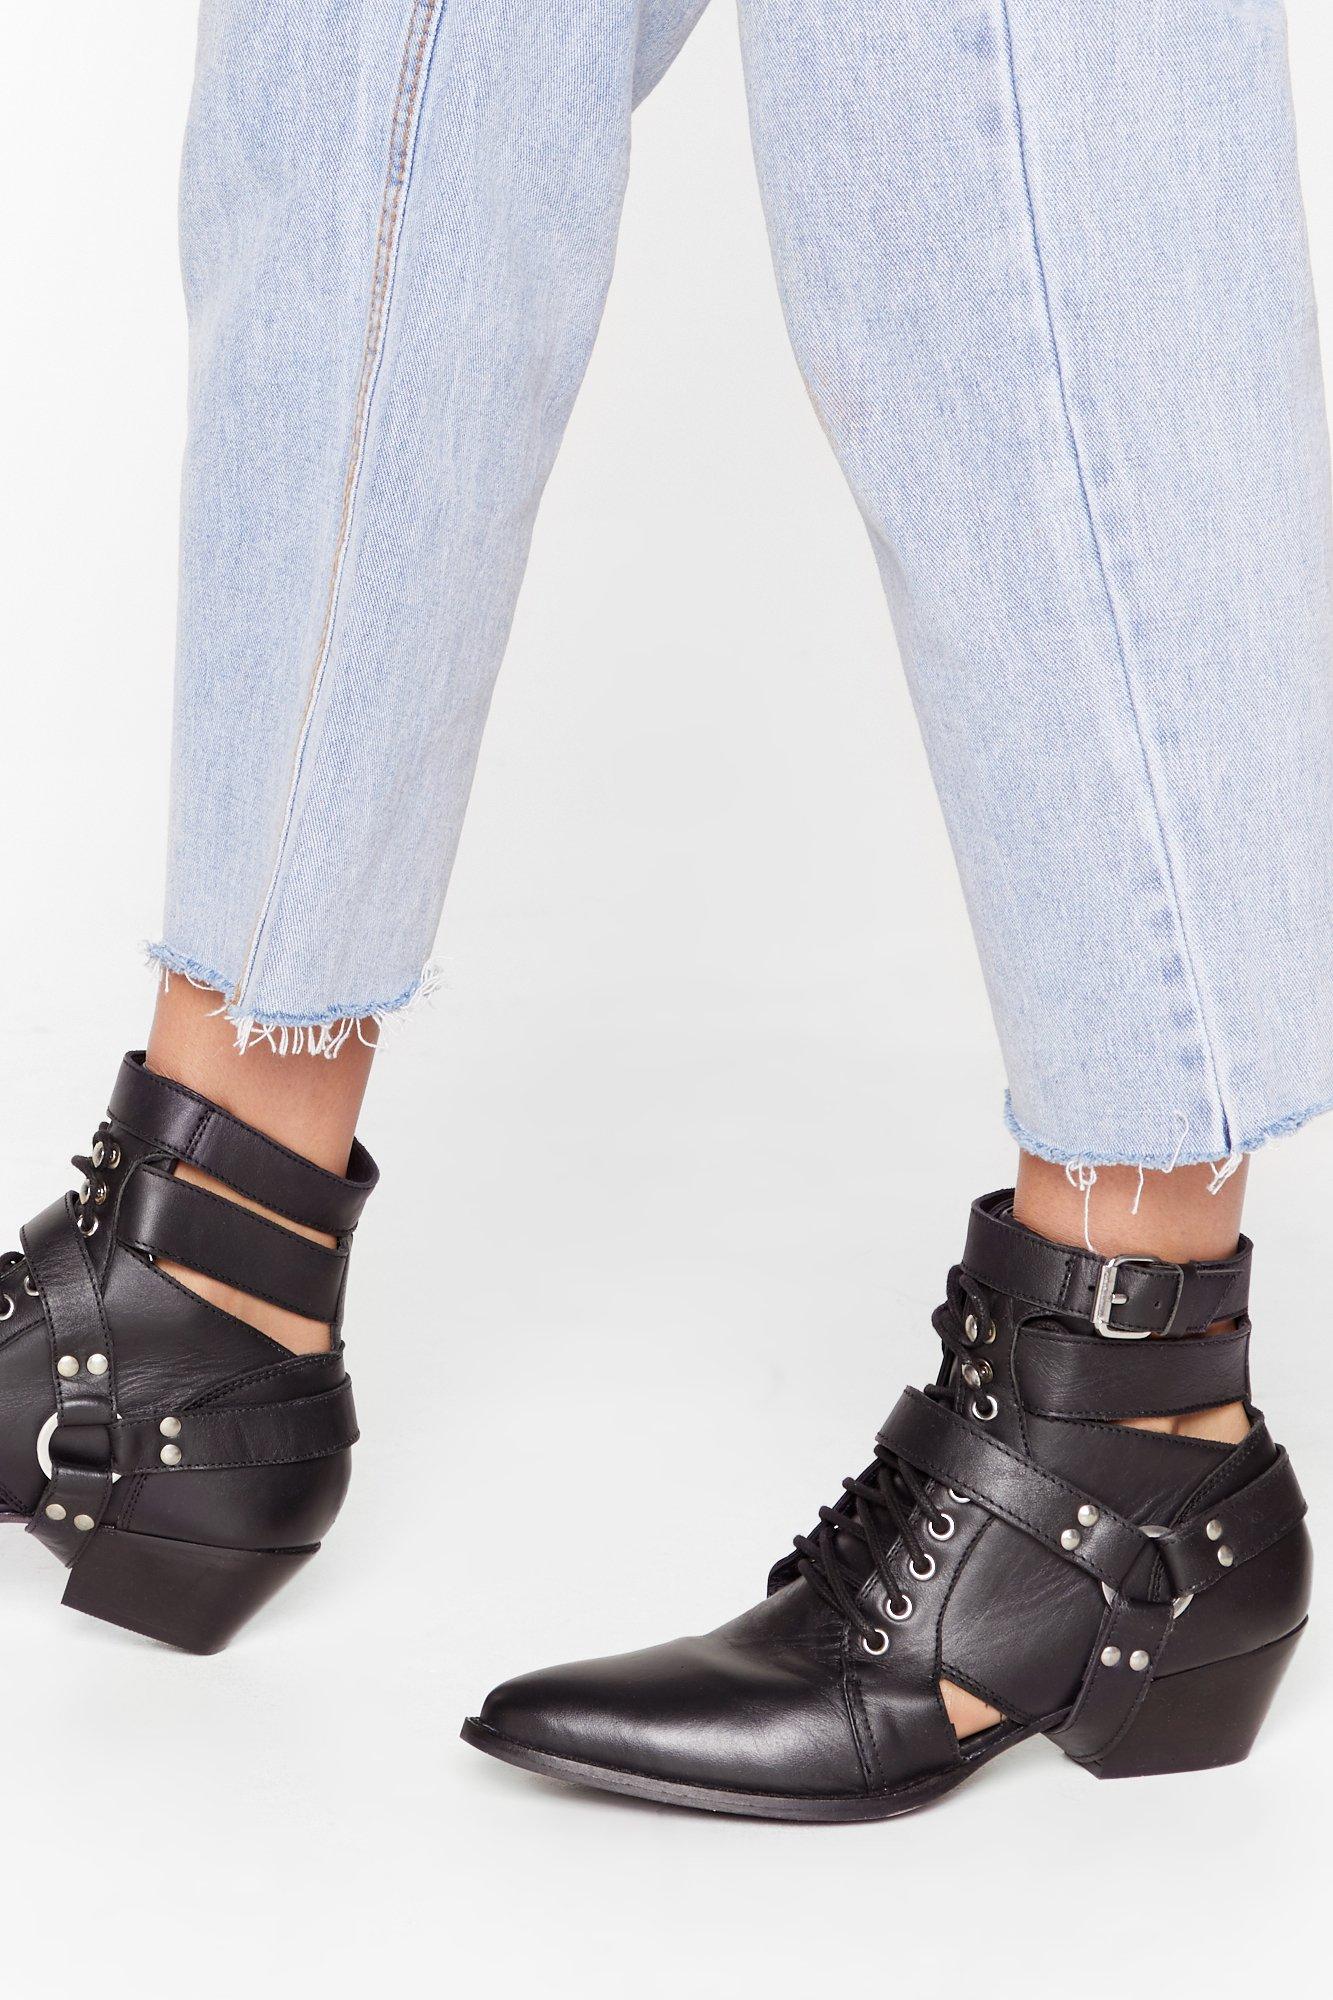 Count Us Cut-Out Leather Lace-Up Boots 